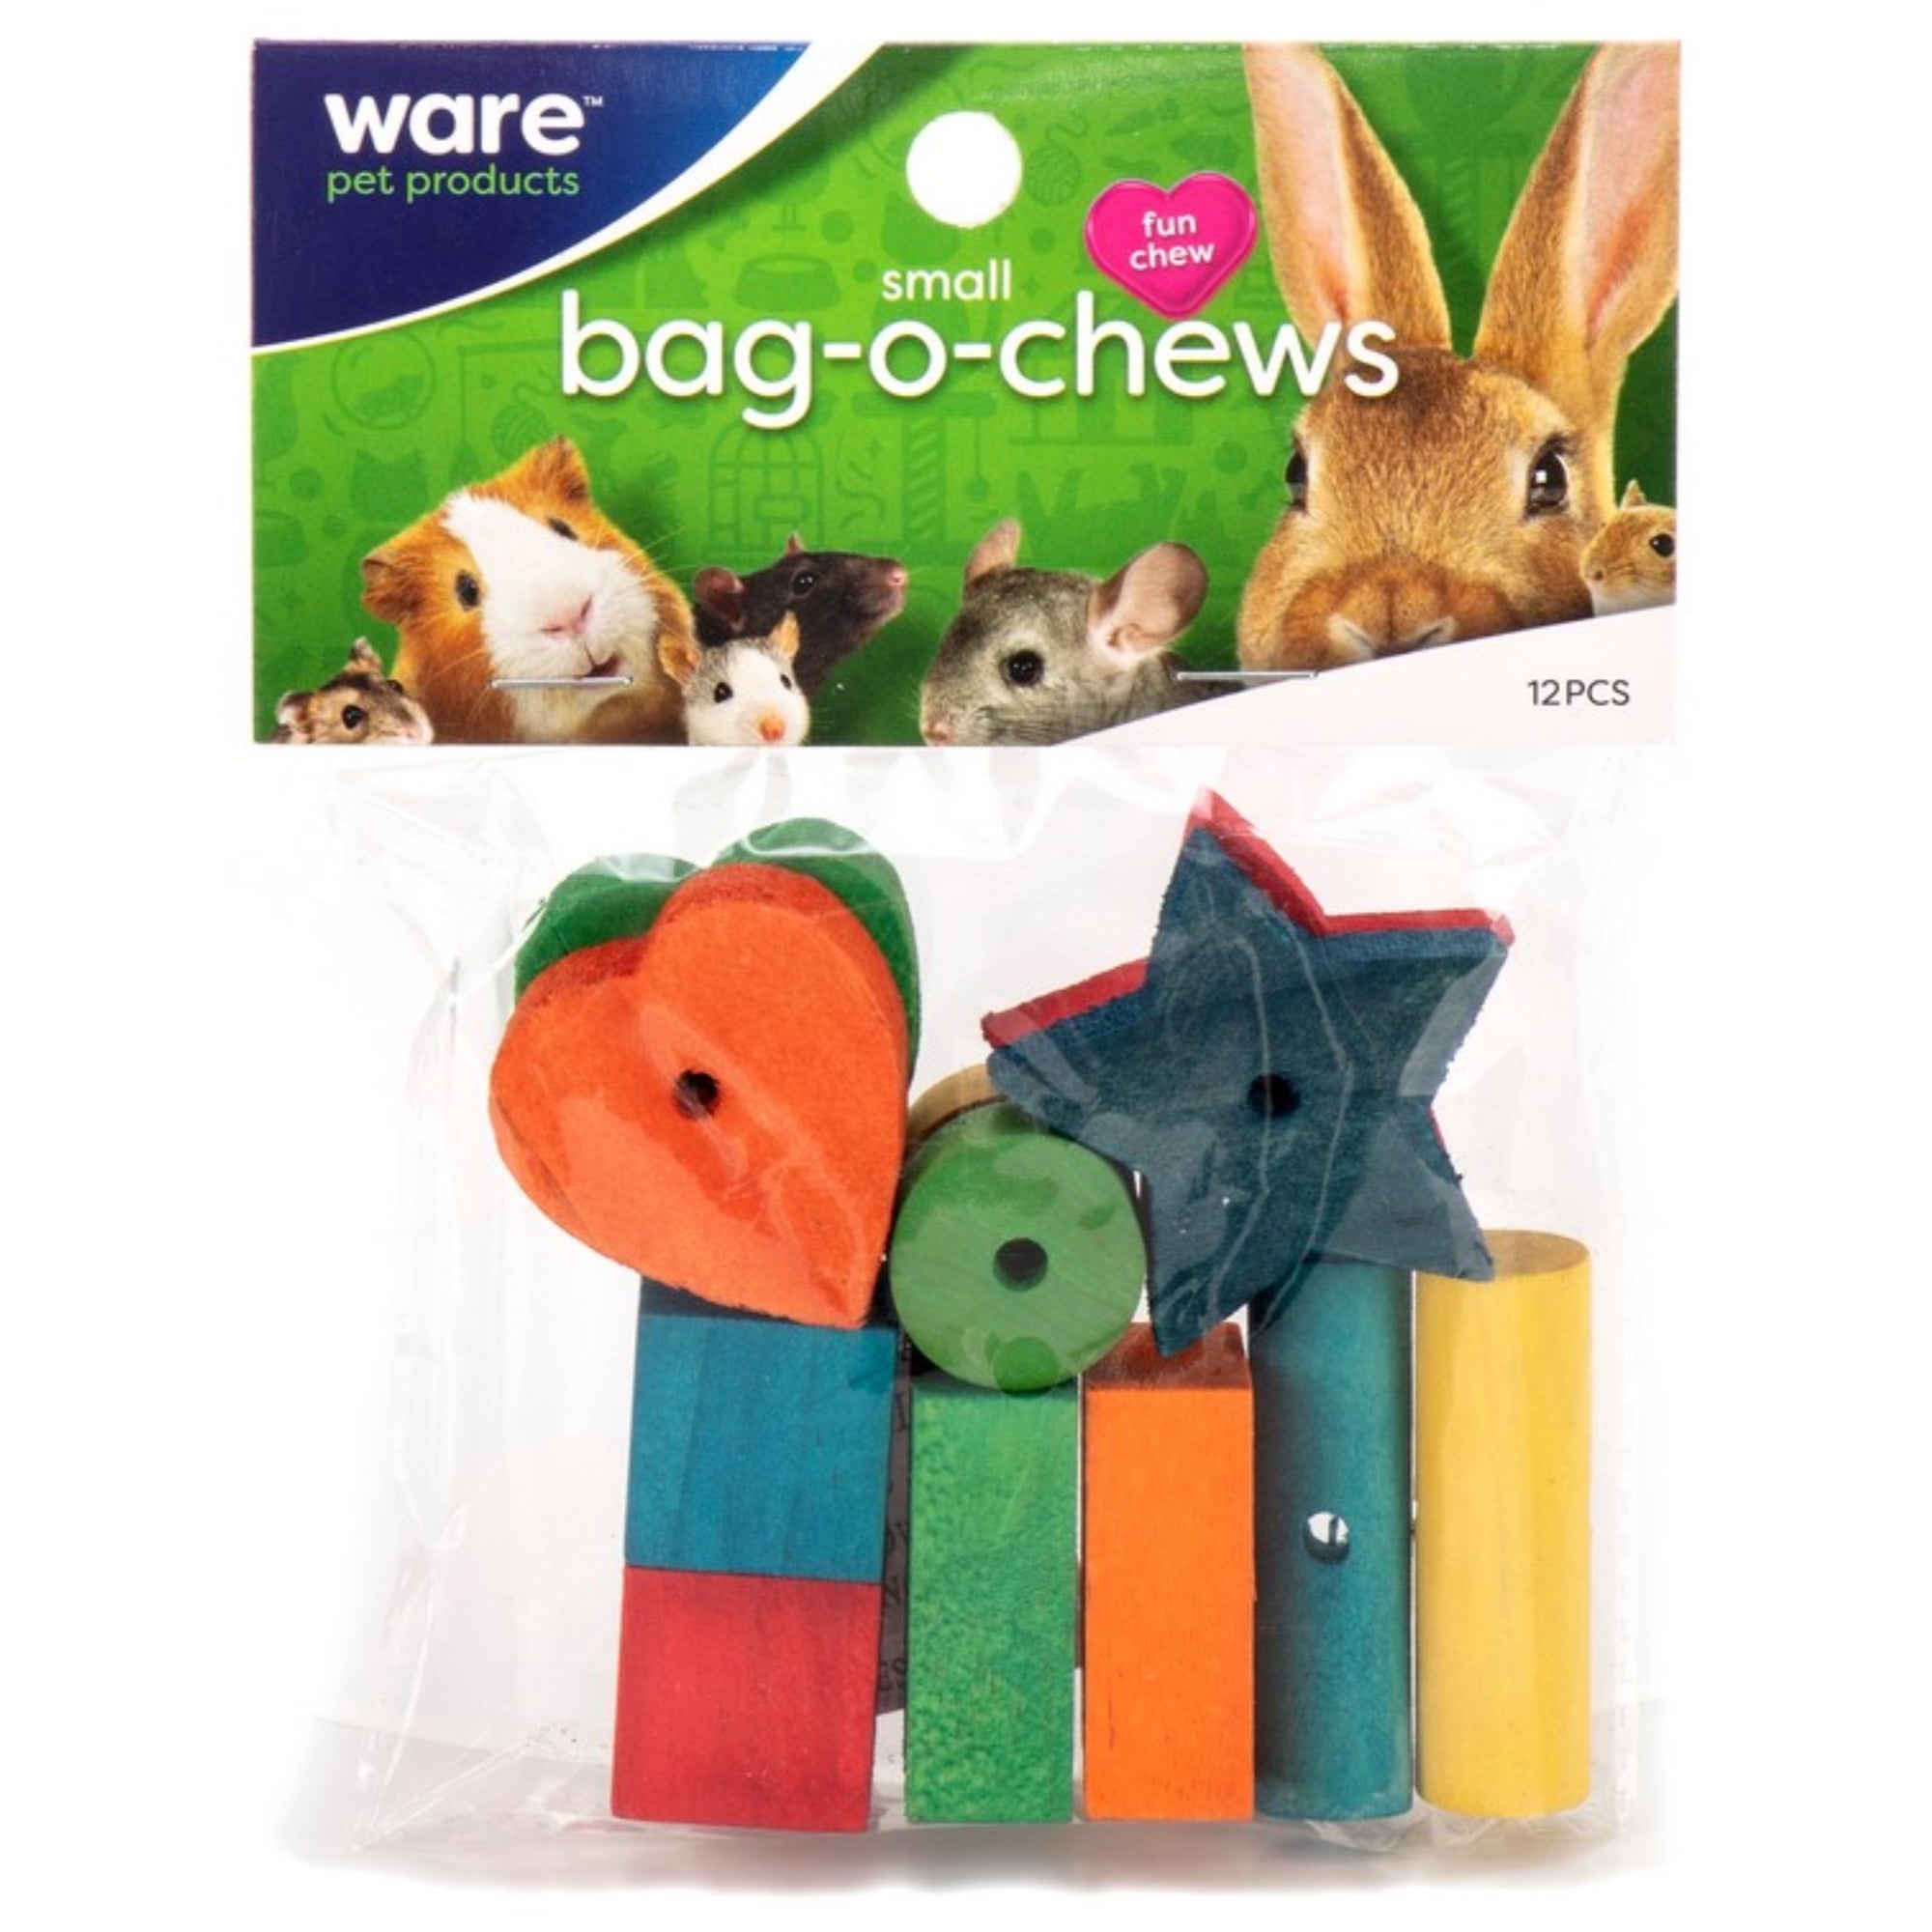 Ware Manufacturing Pine Wood Bag-O-Chews Small Pet Treat, Small (12 Per Pack)